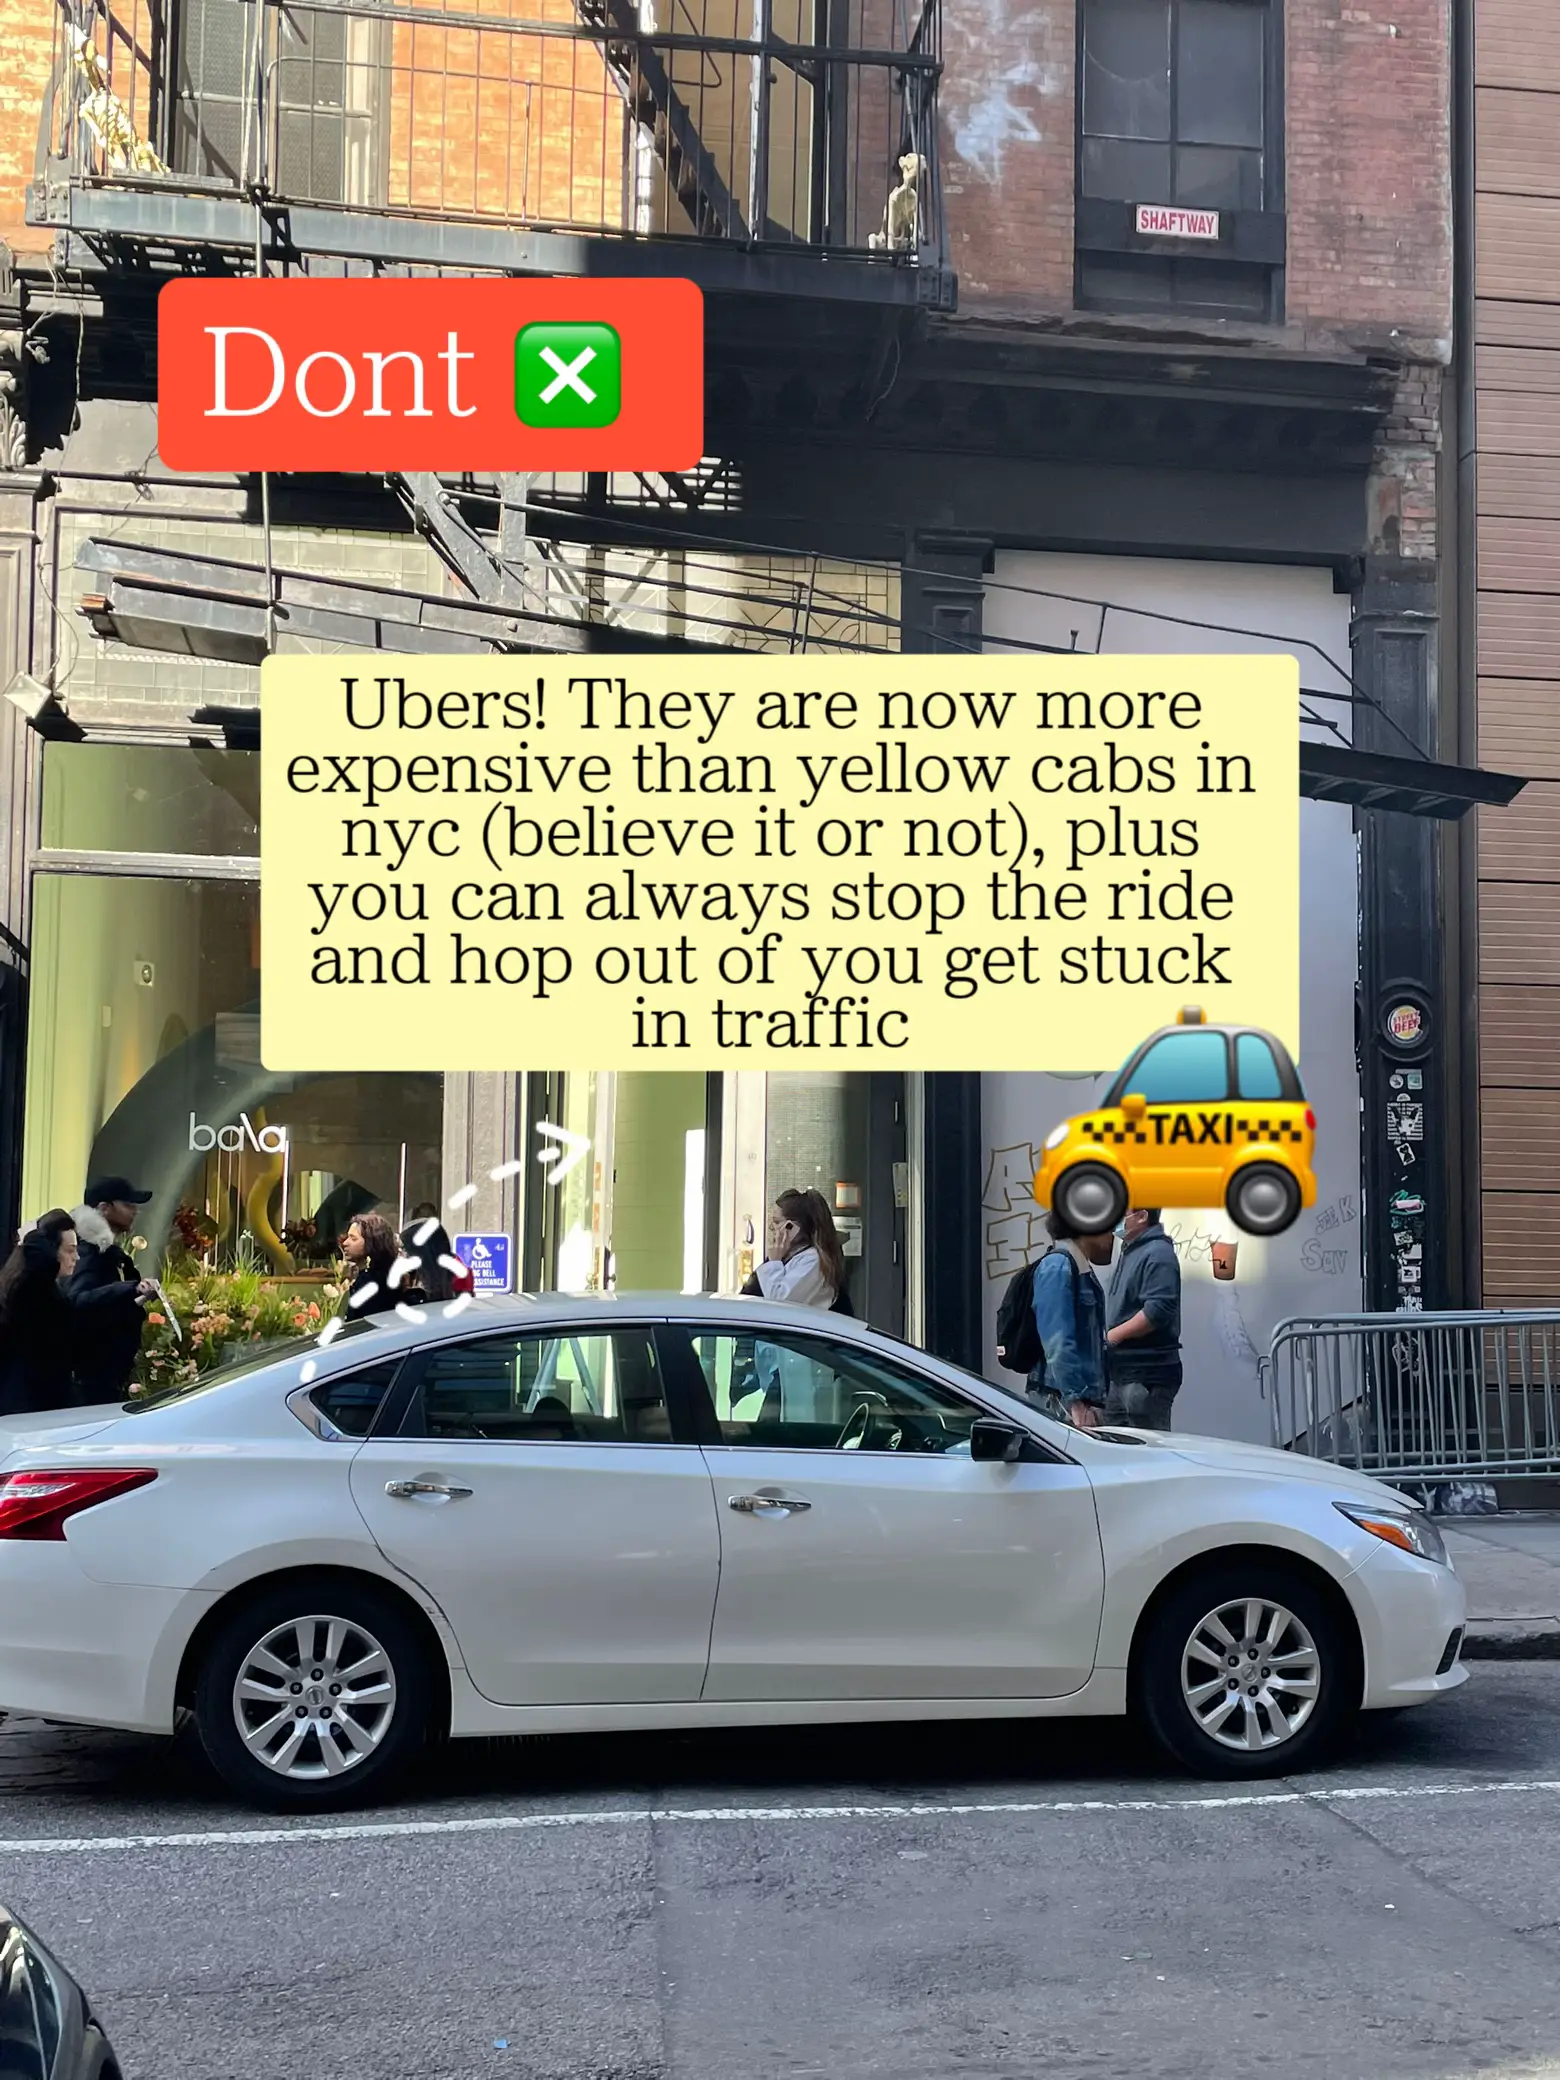  A sign that says "Don't Ubers! They are now more expensive than yellow cabs in nyc".